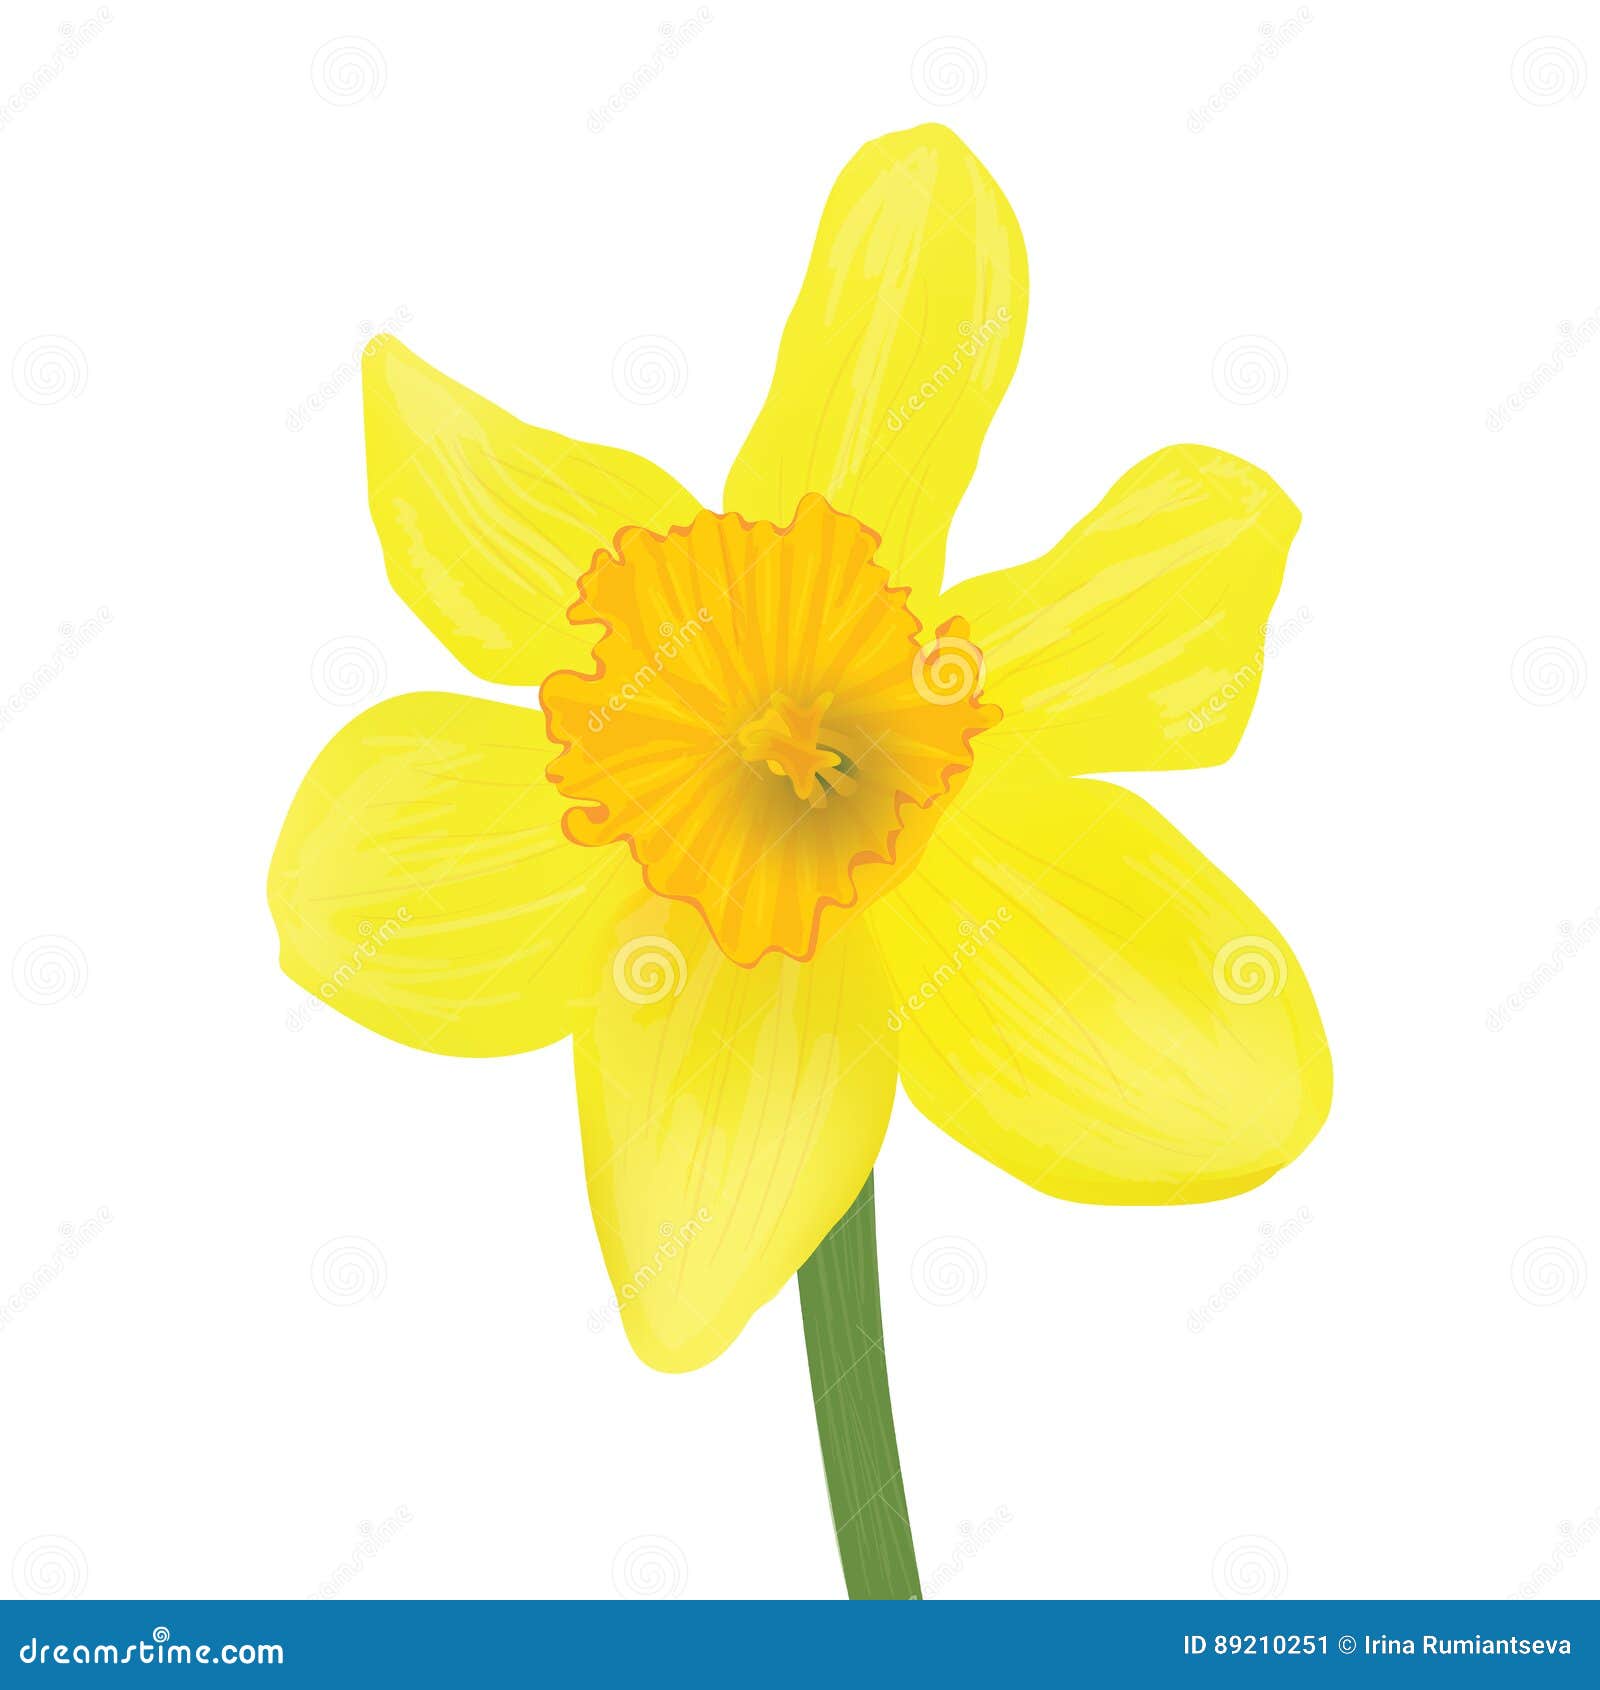 Daffodil Isolated Over White. Stock Illustration - Illustration of ...